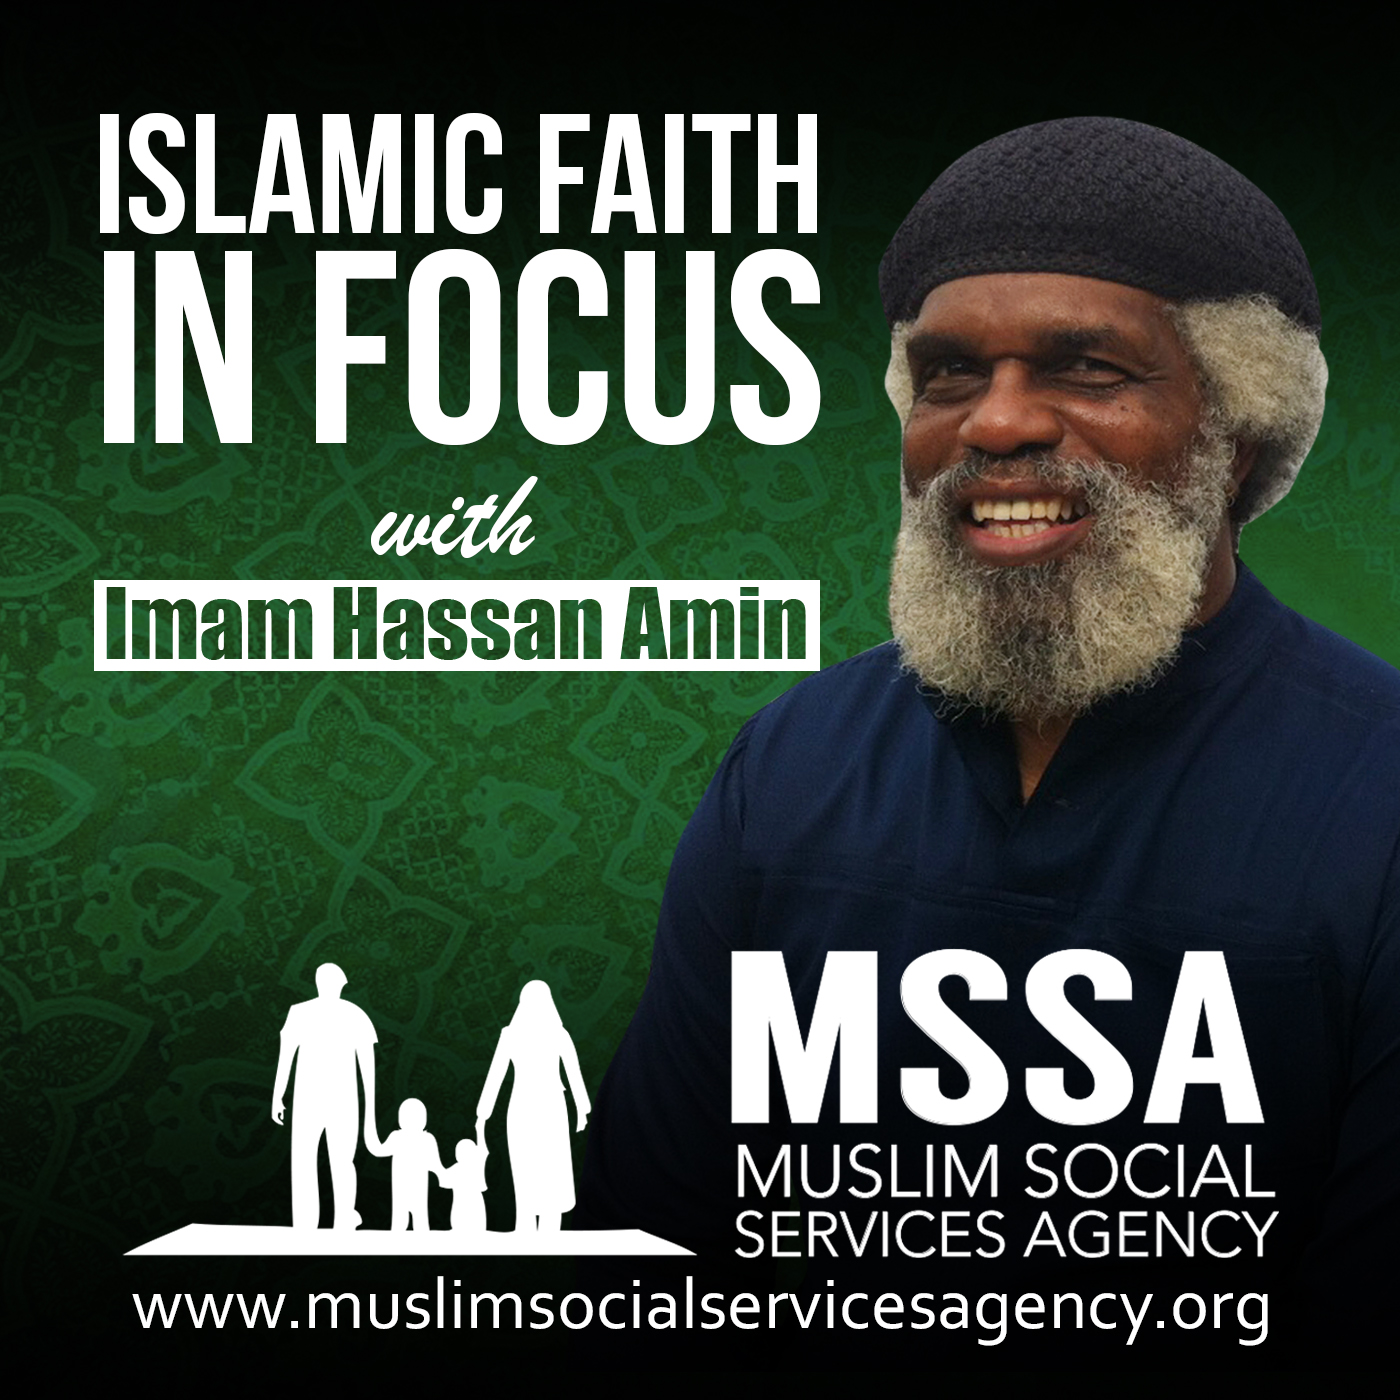 Islamic Faith in Focus with Imam Hassan Amin - Welcome to the Venn Network